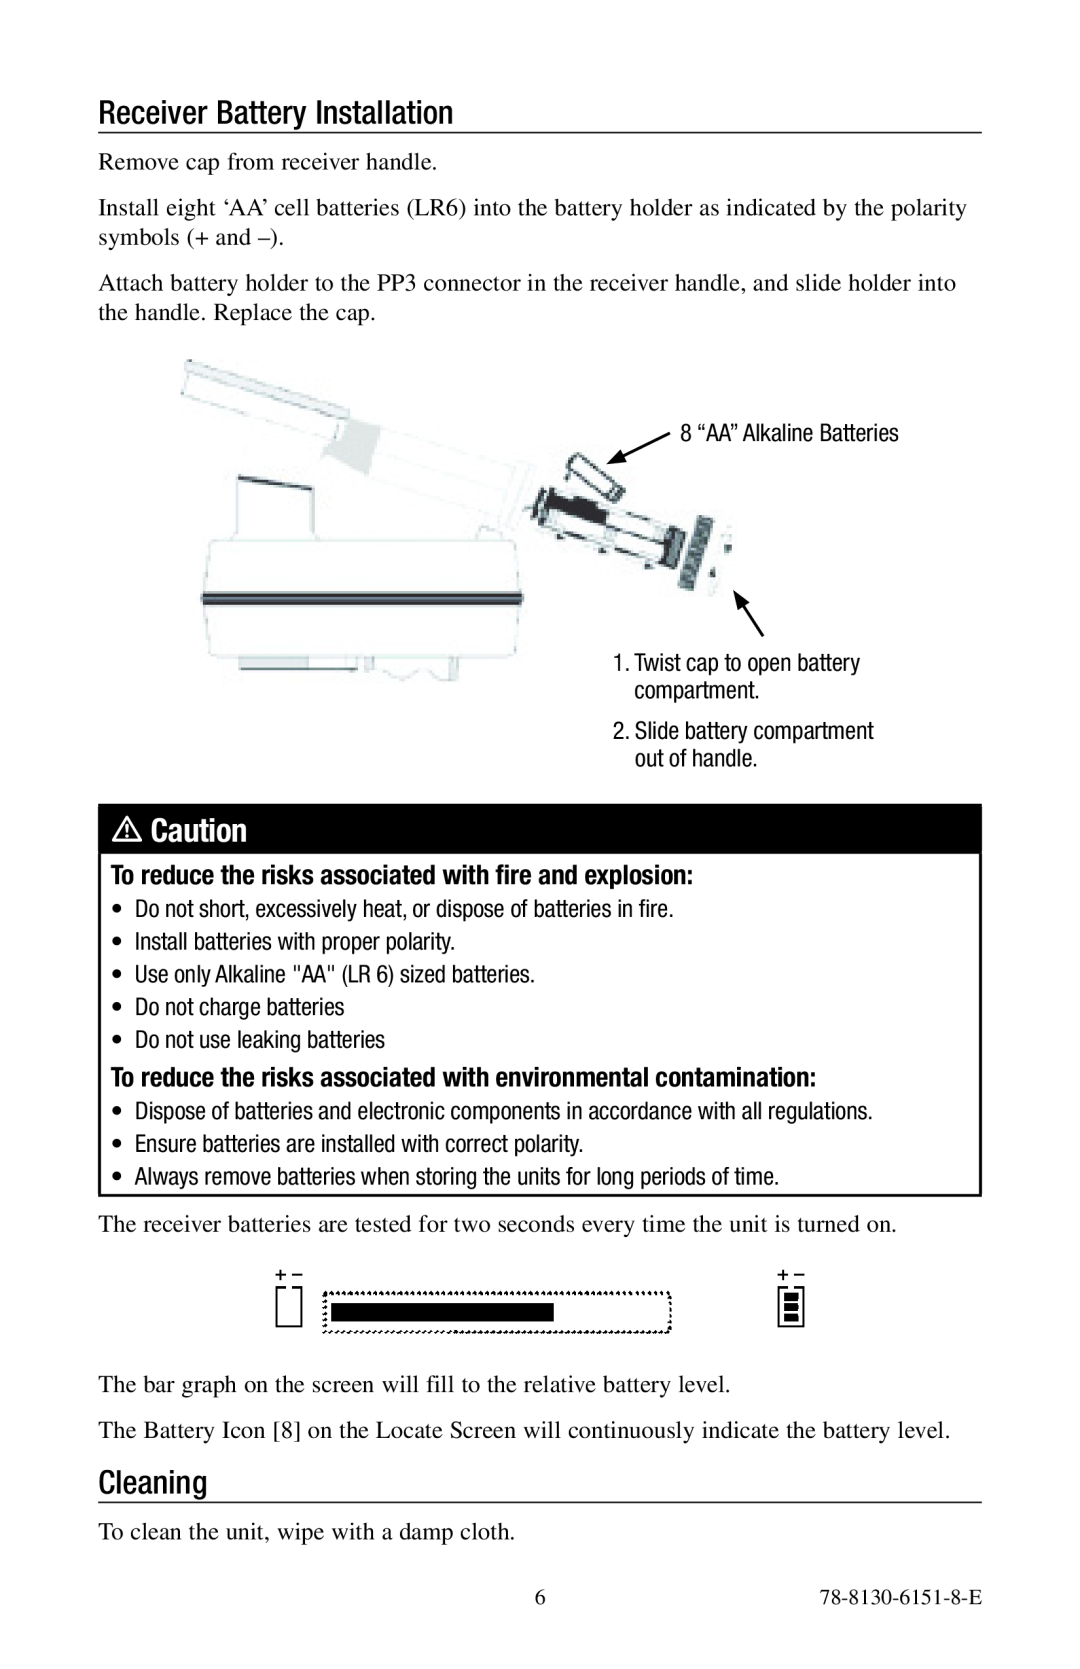 3M 2273ME-iD, 2250ME-iD manual Receiver Battery Installation, Cleaning, mCaution 